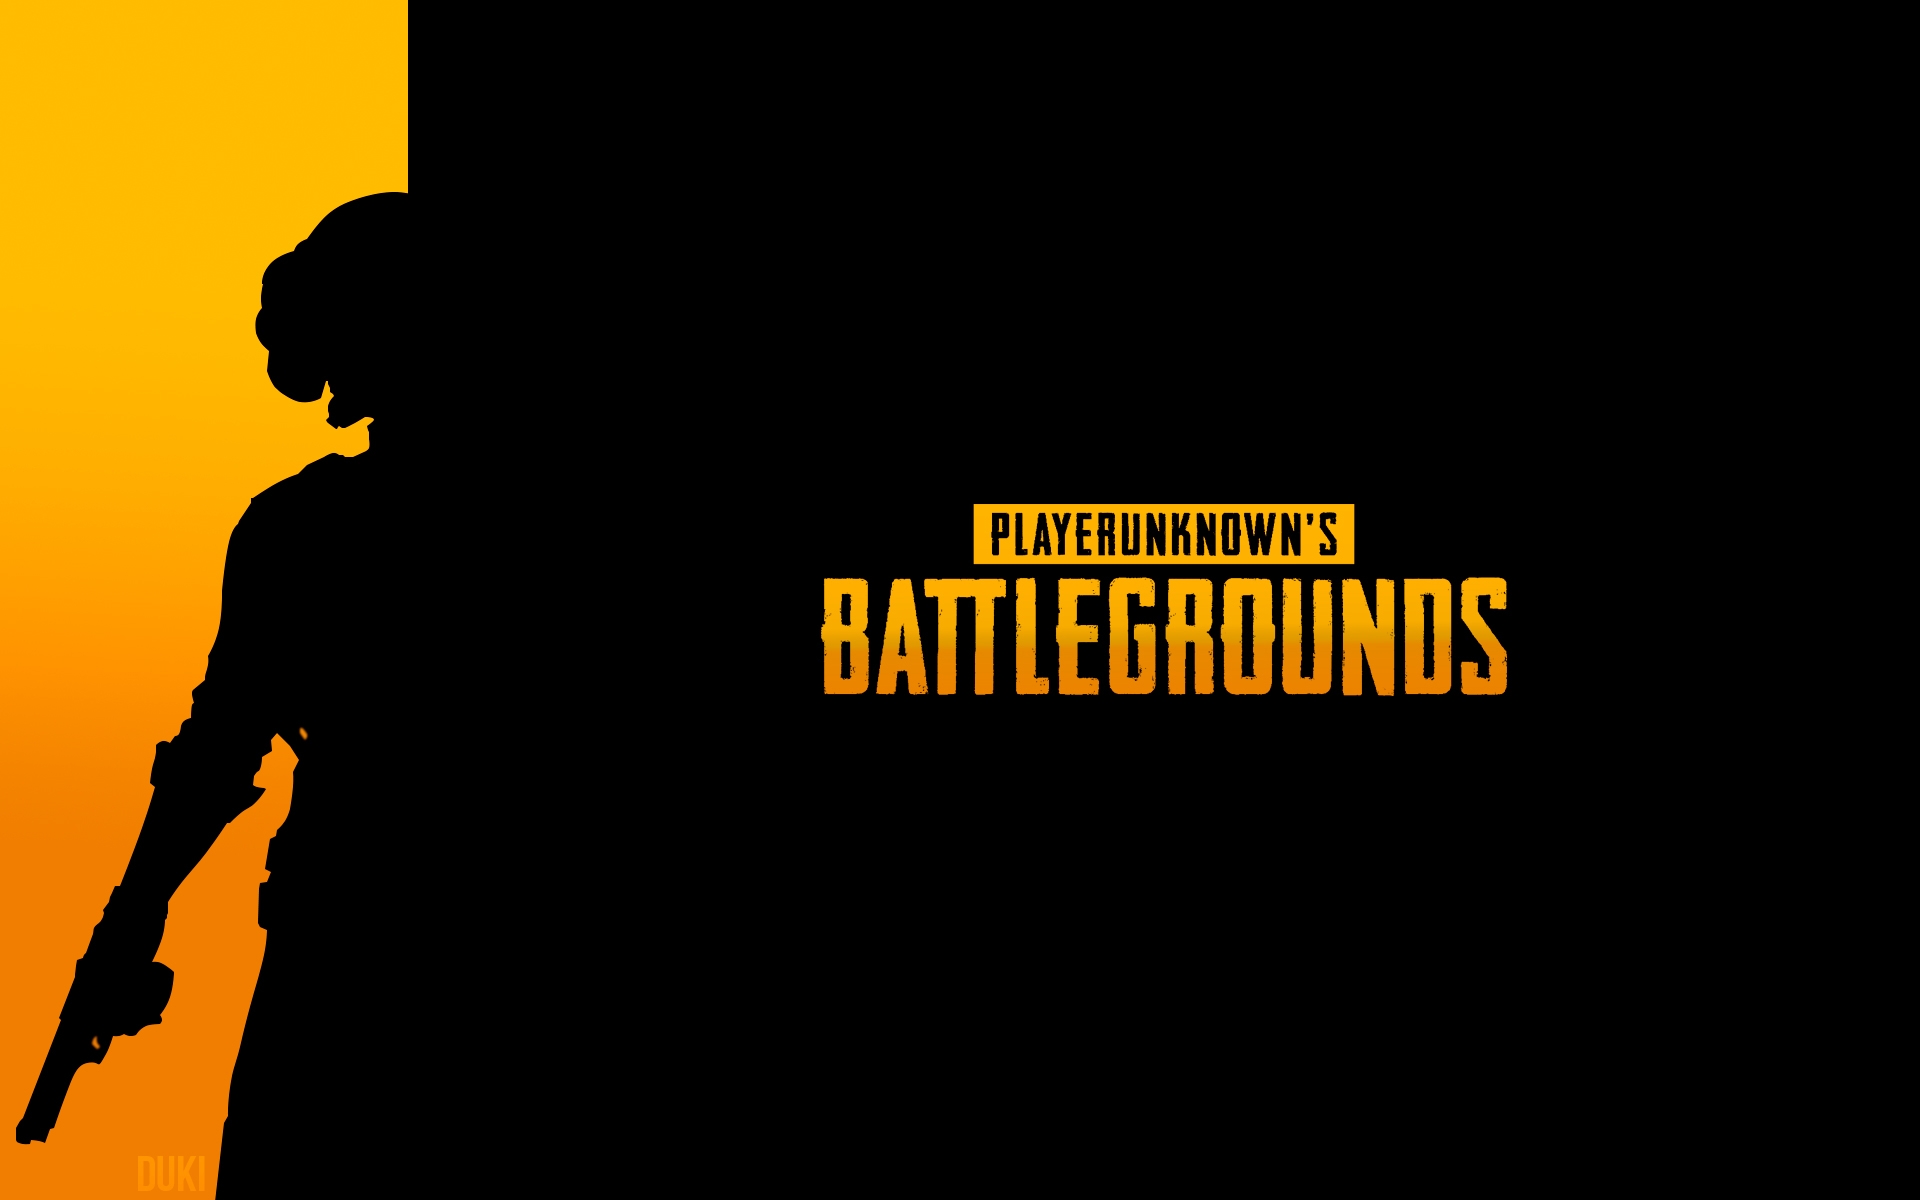 Wallpapers wallpaper pubg playerunknown character silhouette on the desktop